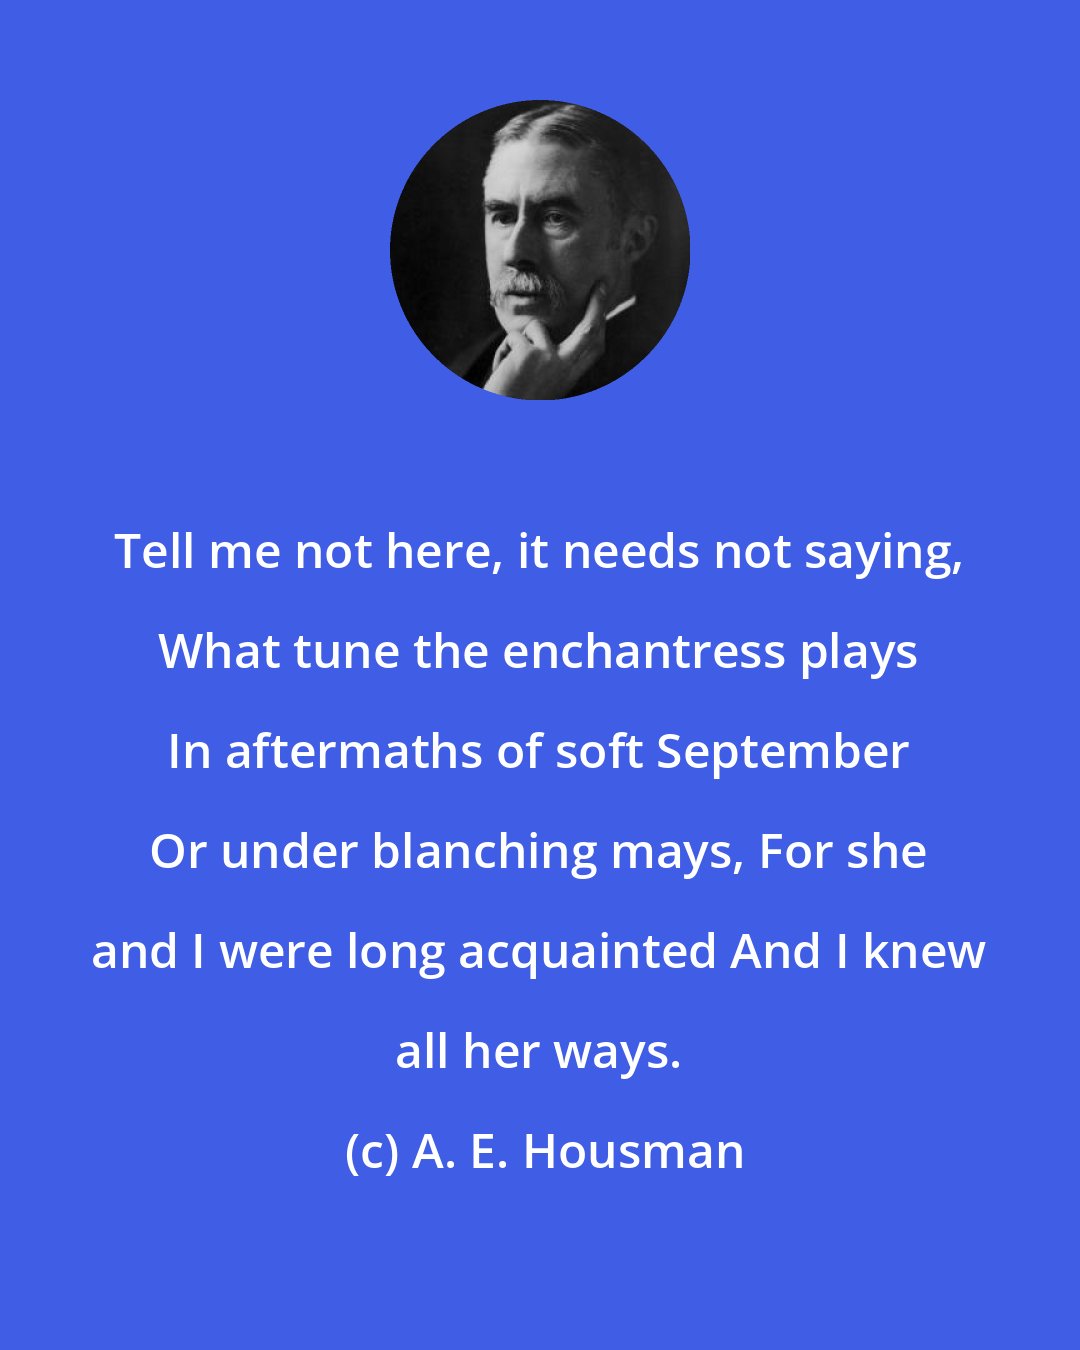 A. E. Housman: Tell me not here, it needs not saying, What tune the enchantress plays In aftermaths of soft September Or under blanching mays, For she and I were long acquainted And I knew all her ways.